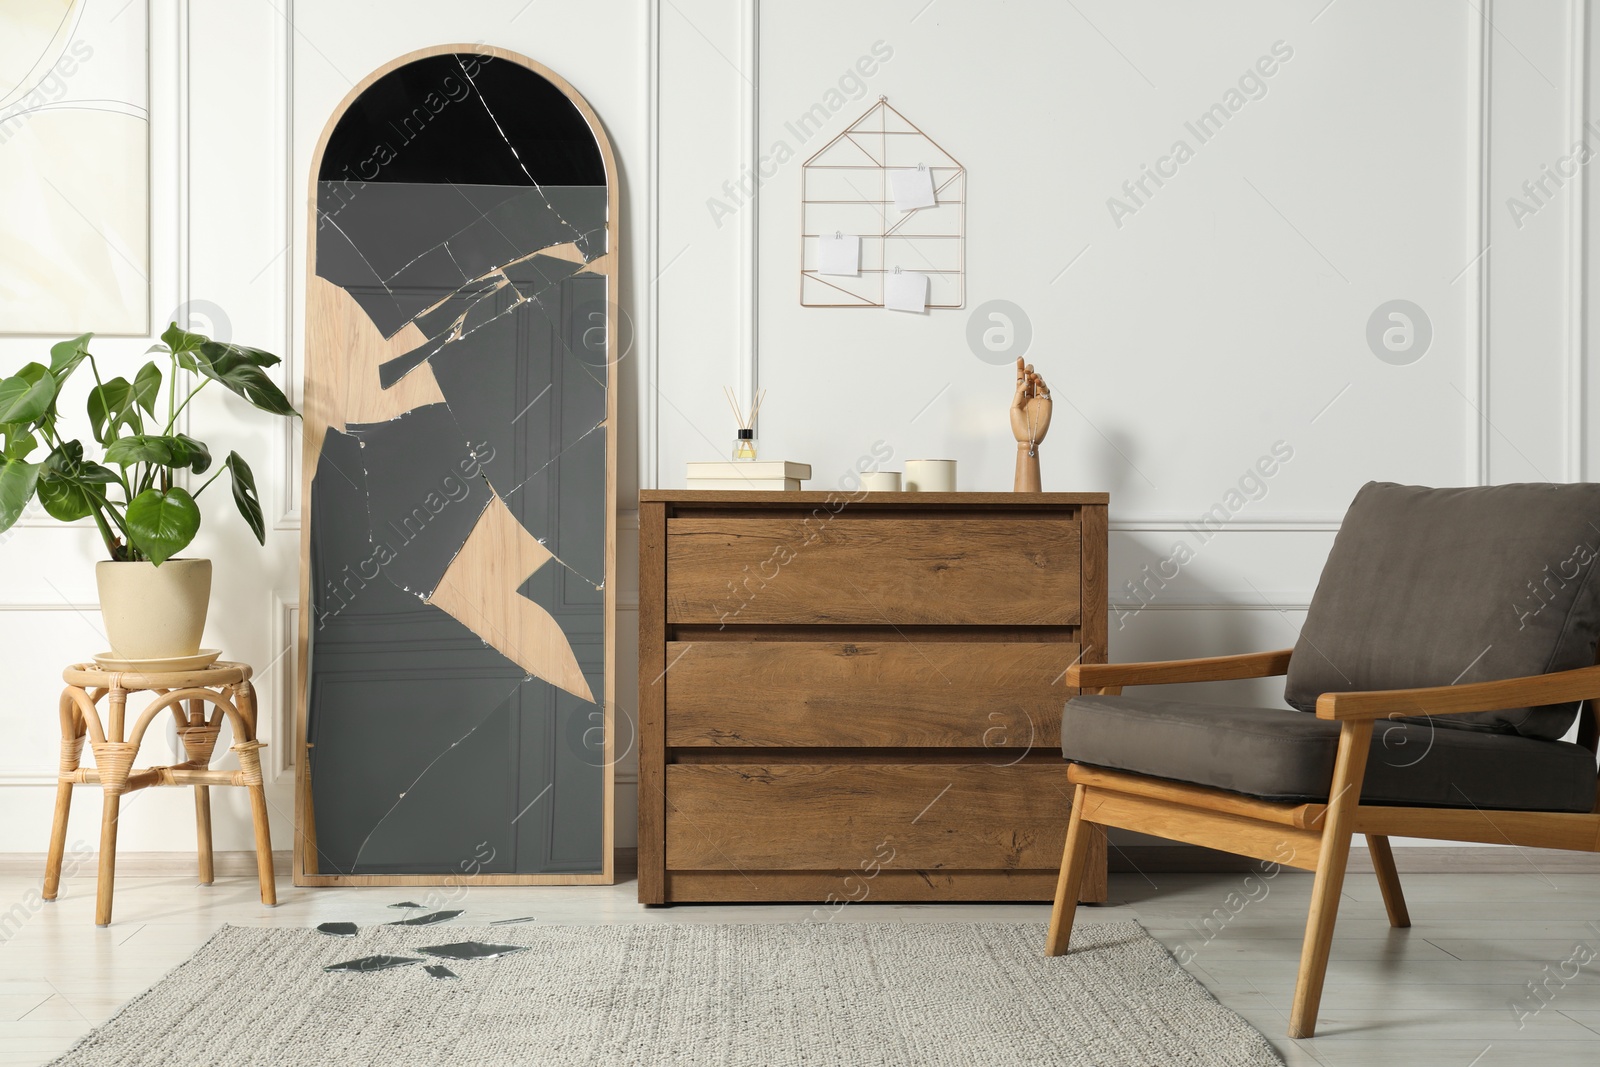 Photo of Broken mirror, wooden chest of drawers, armchair and houseplant in room